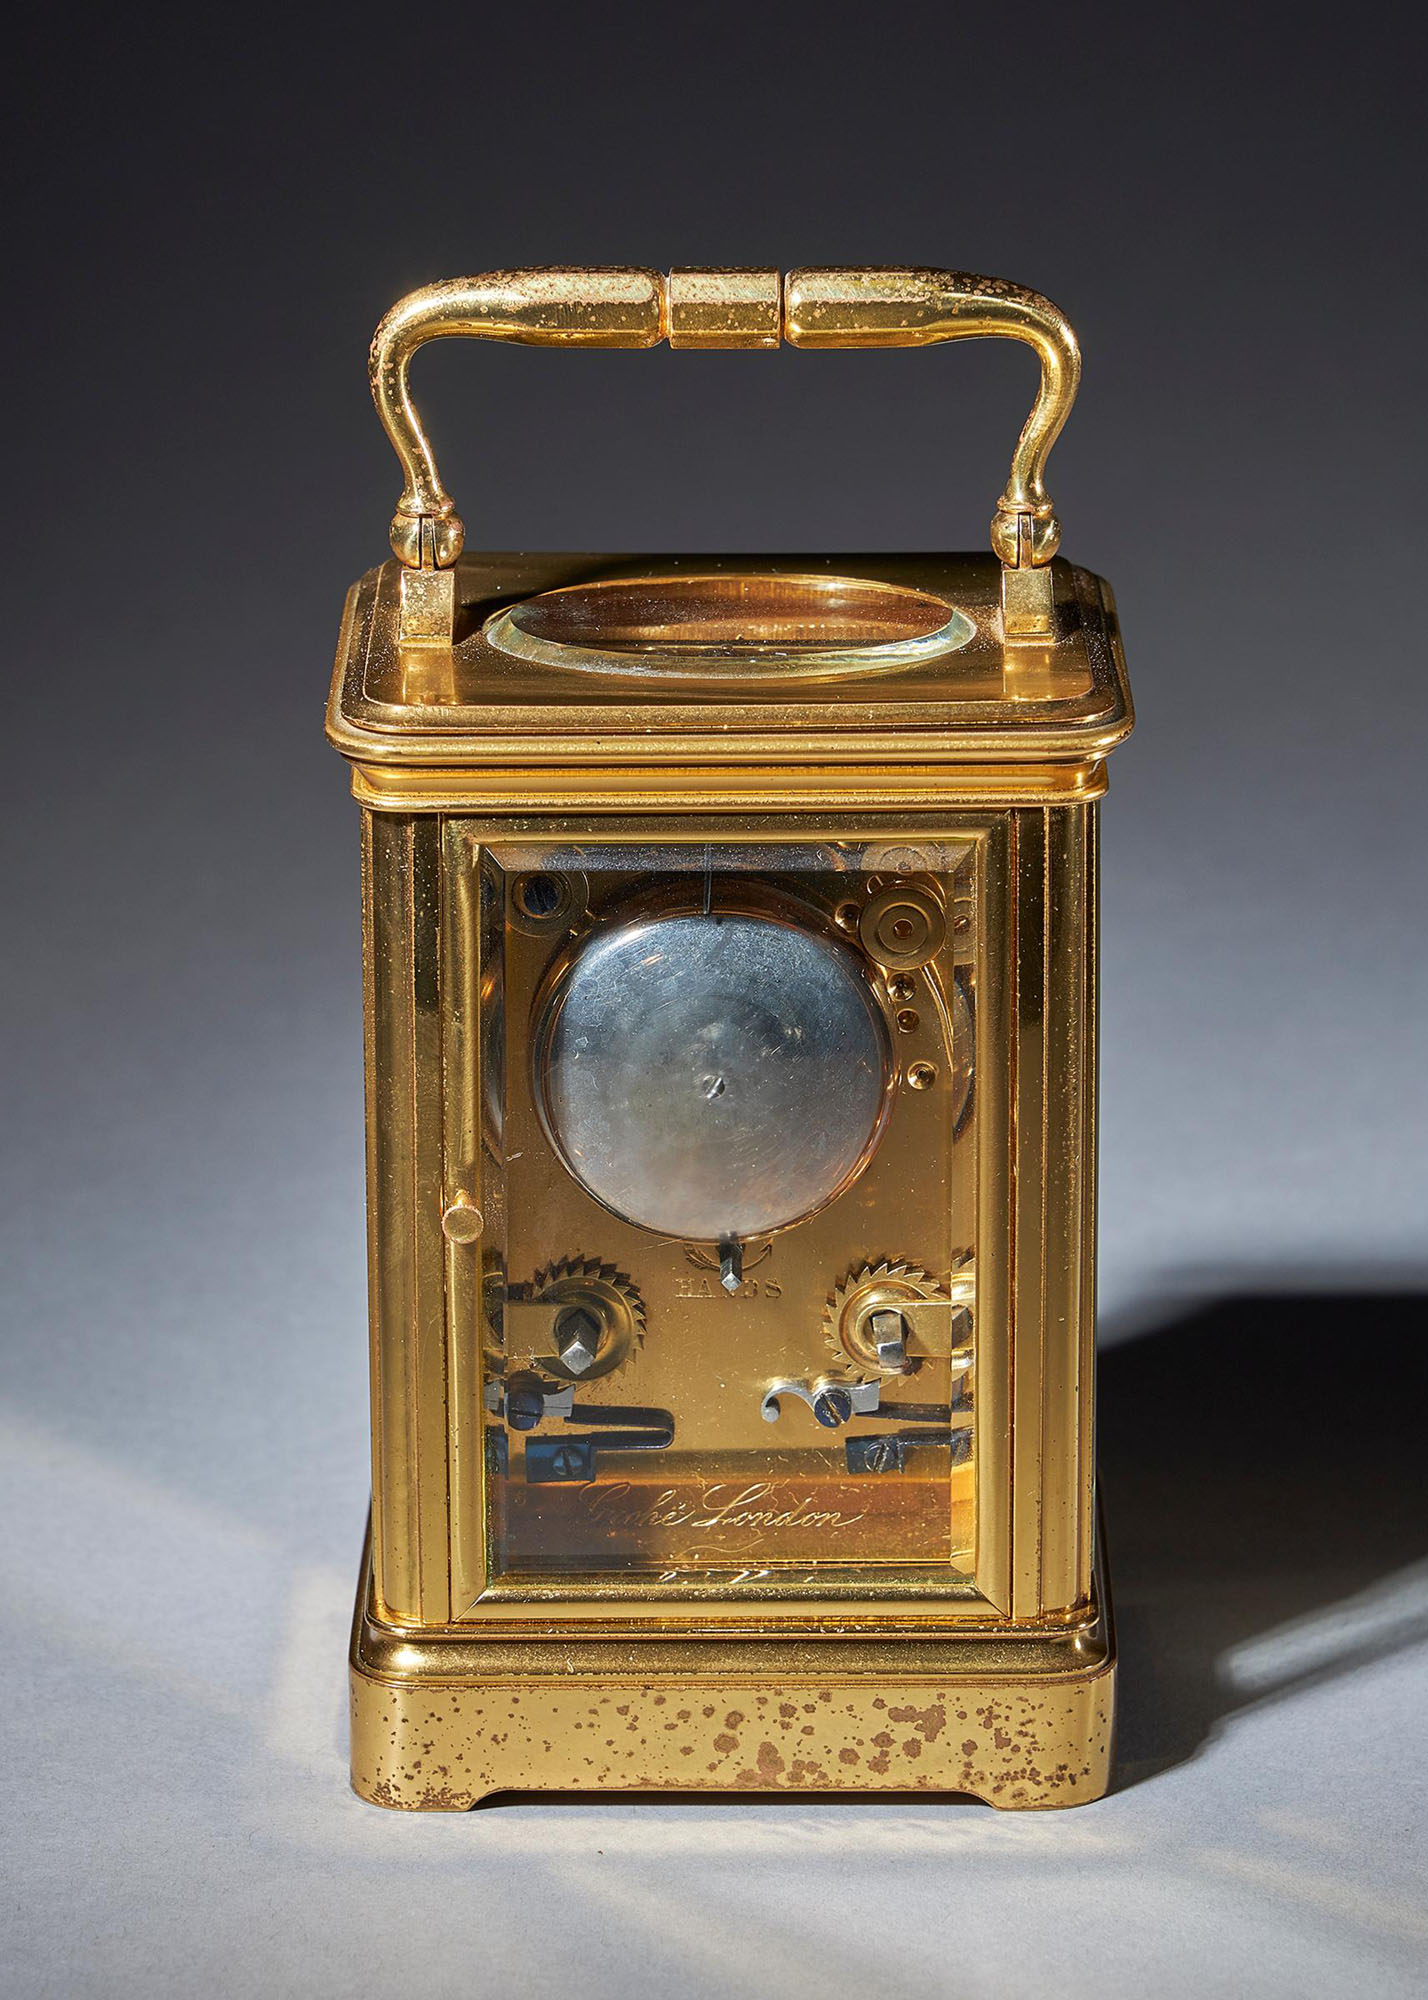 Striking 19th Century Carriage Clock with a Gilt-Brass Corniche Case by Grohé 6